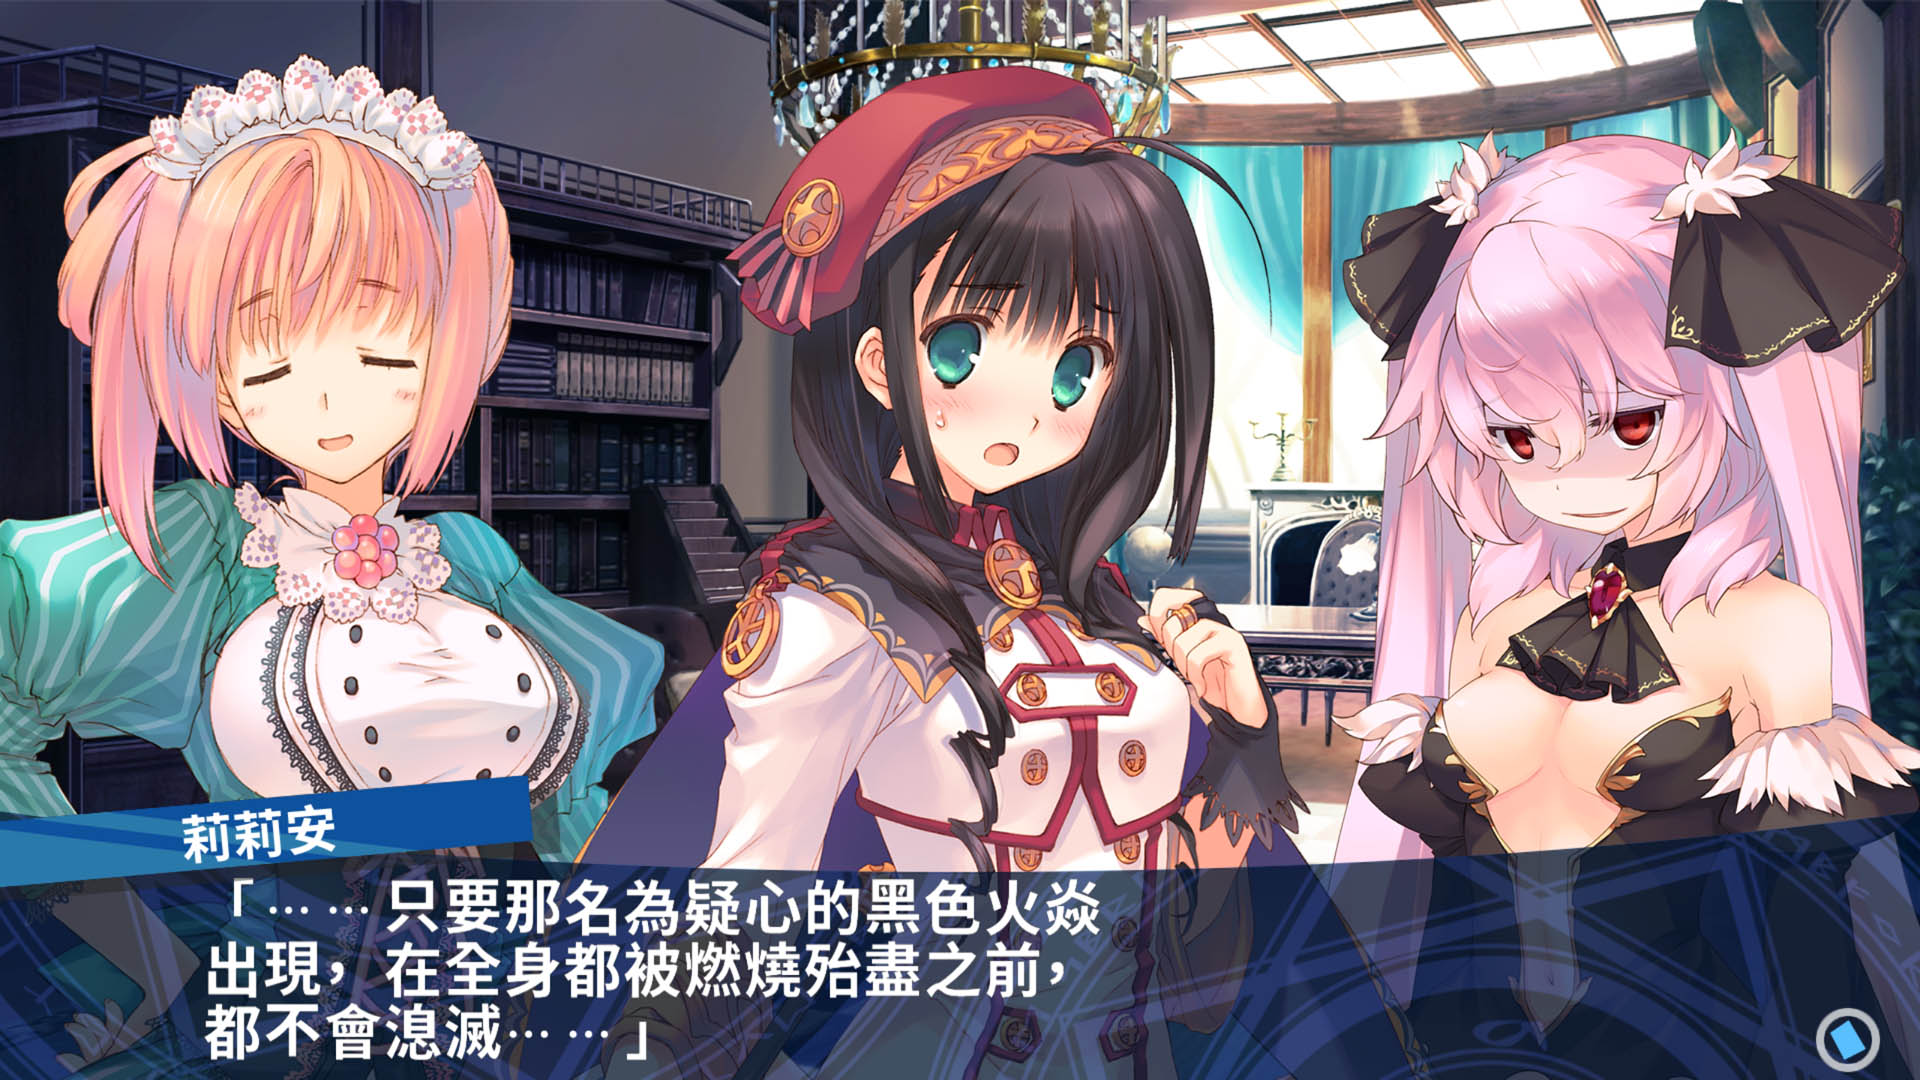 Dungeon Travelers 2: The Royal Library & the Monster Seal (Traditional Chinese) - RPG - 3 - Select